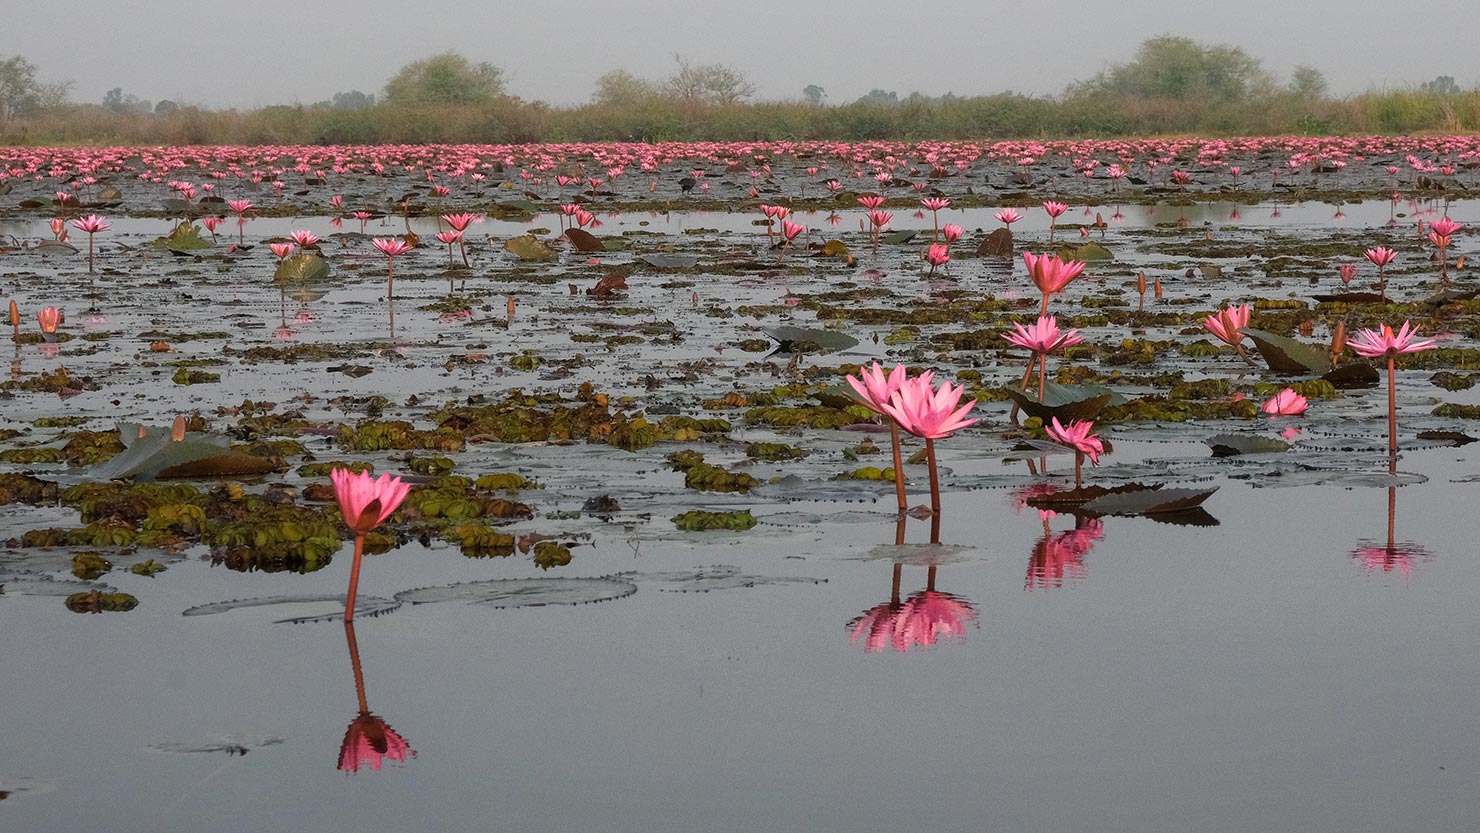 Lilies that carpet Nong Han Lake begin to open shortly after sunrise